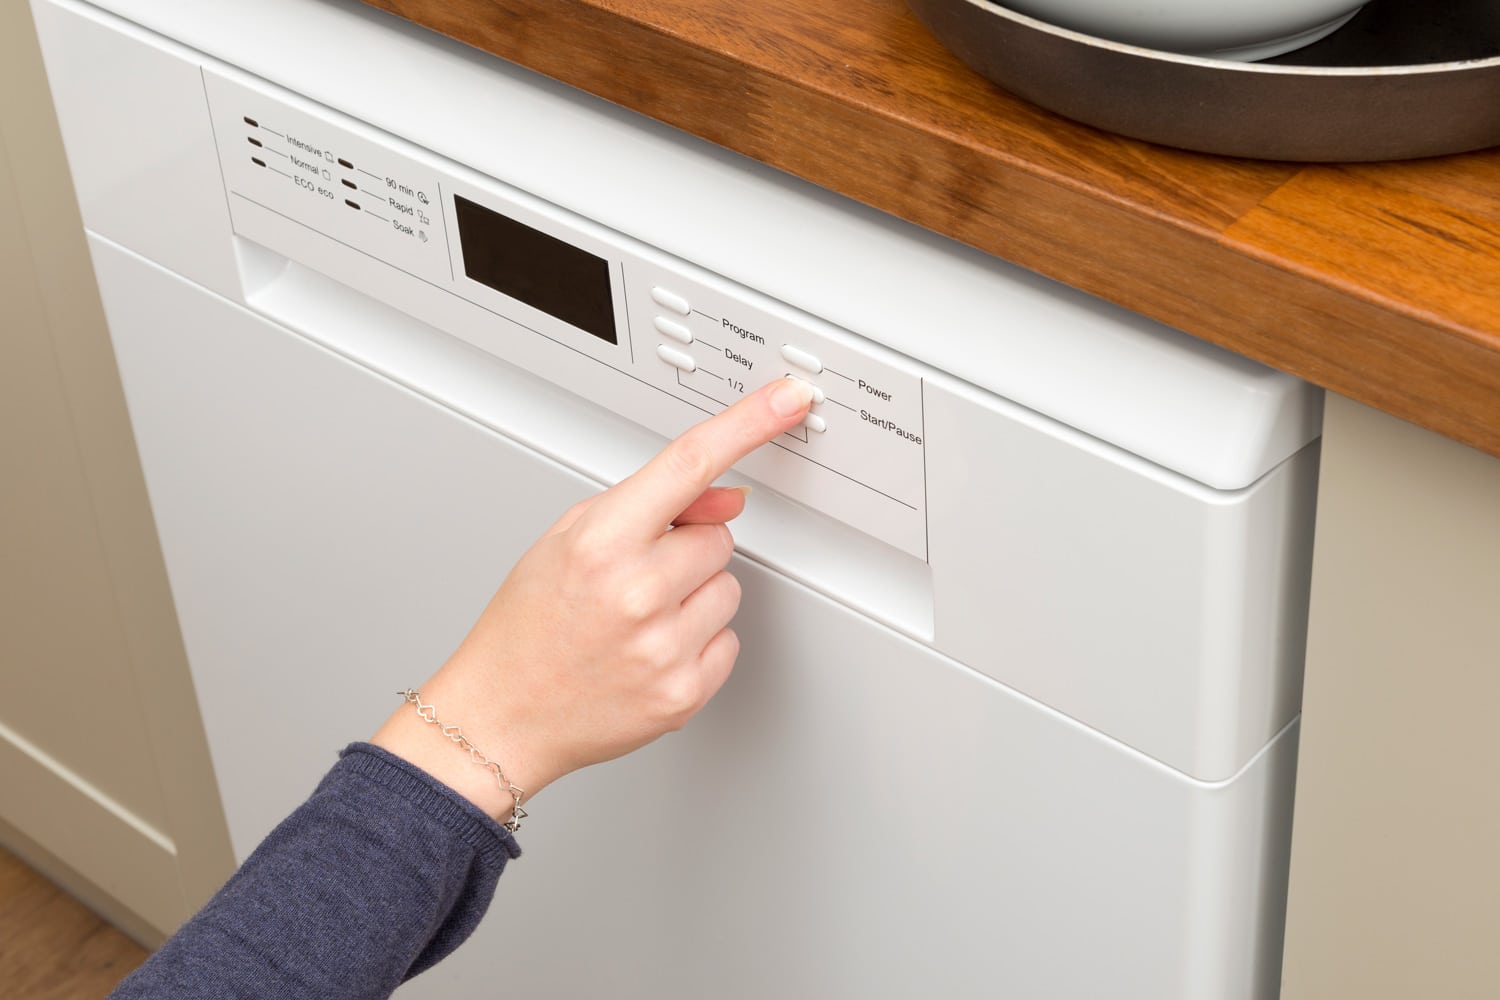 Woman's finger pressing the 'start' button of a dishwasher